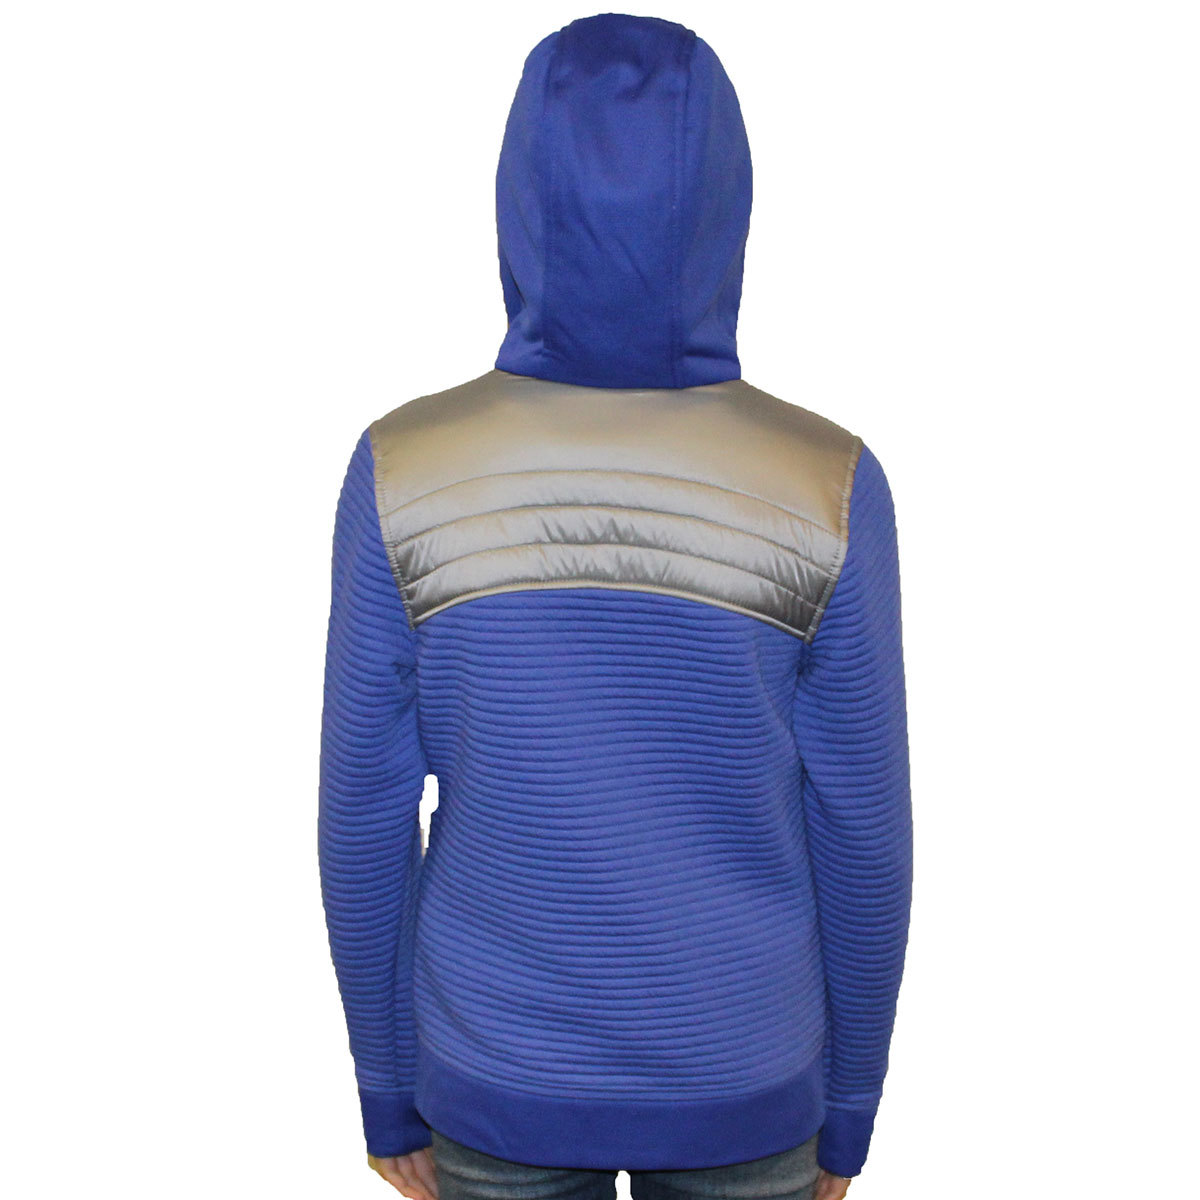 Gerry Ribbed Youth Jacket in Blue